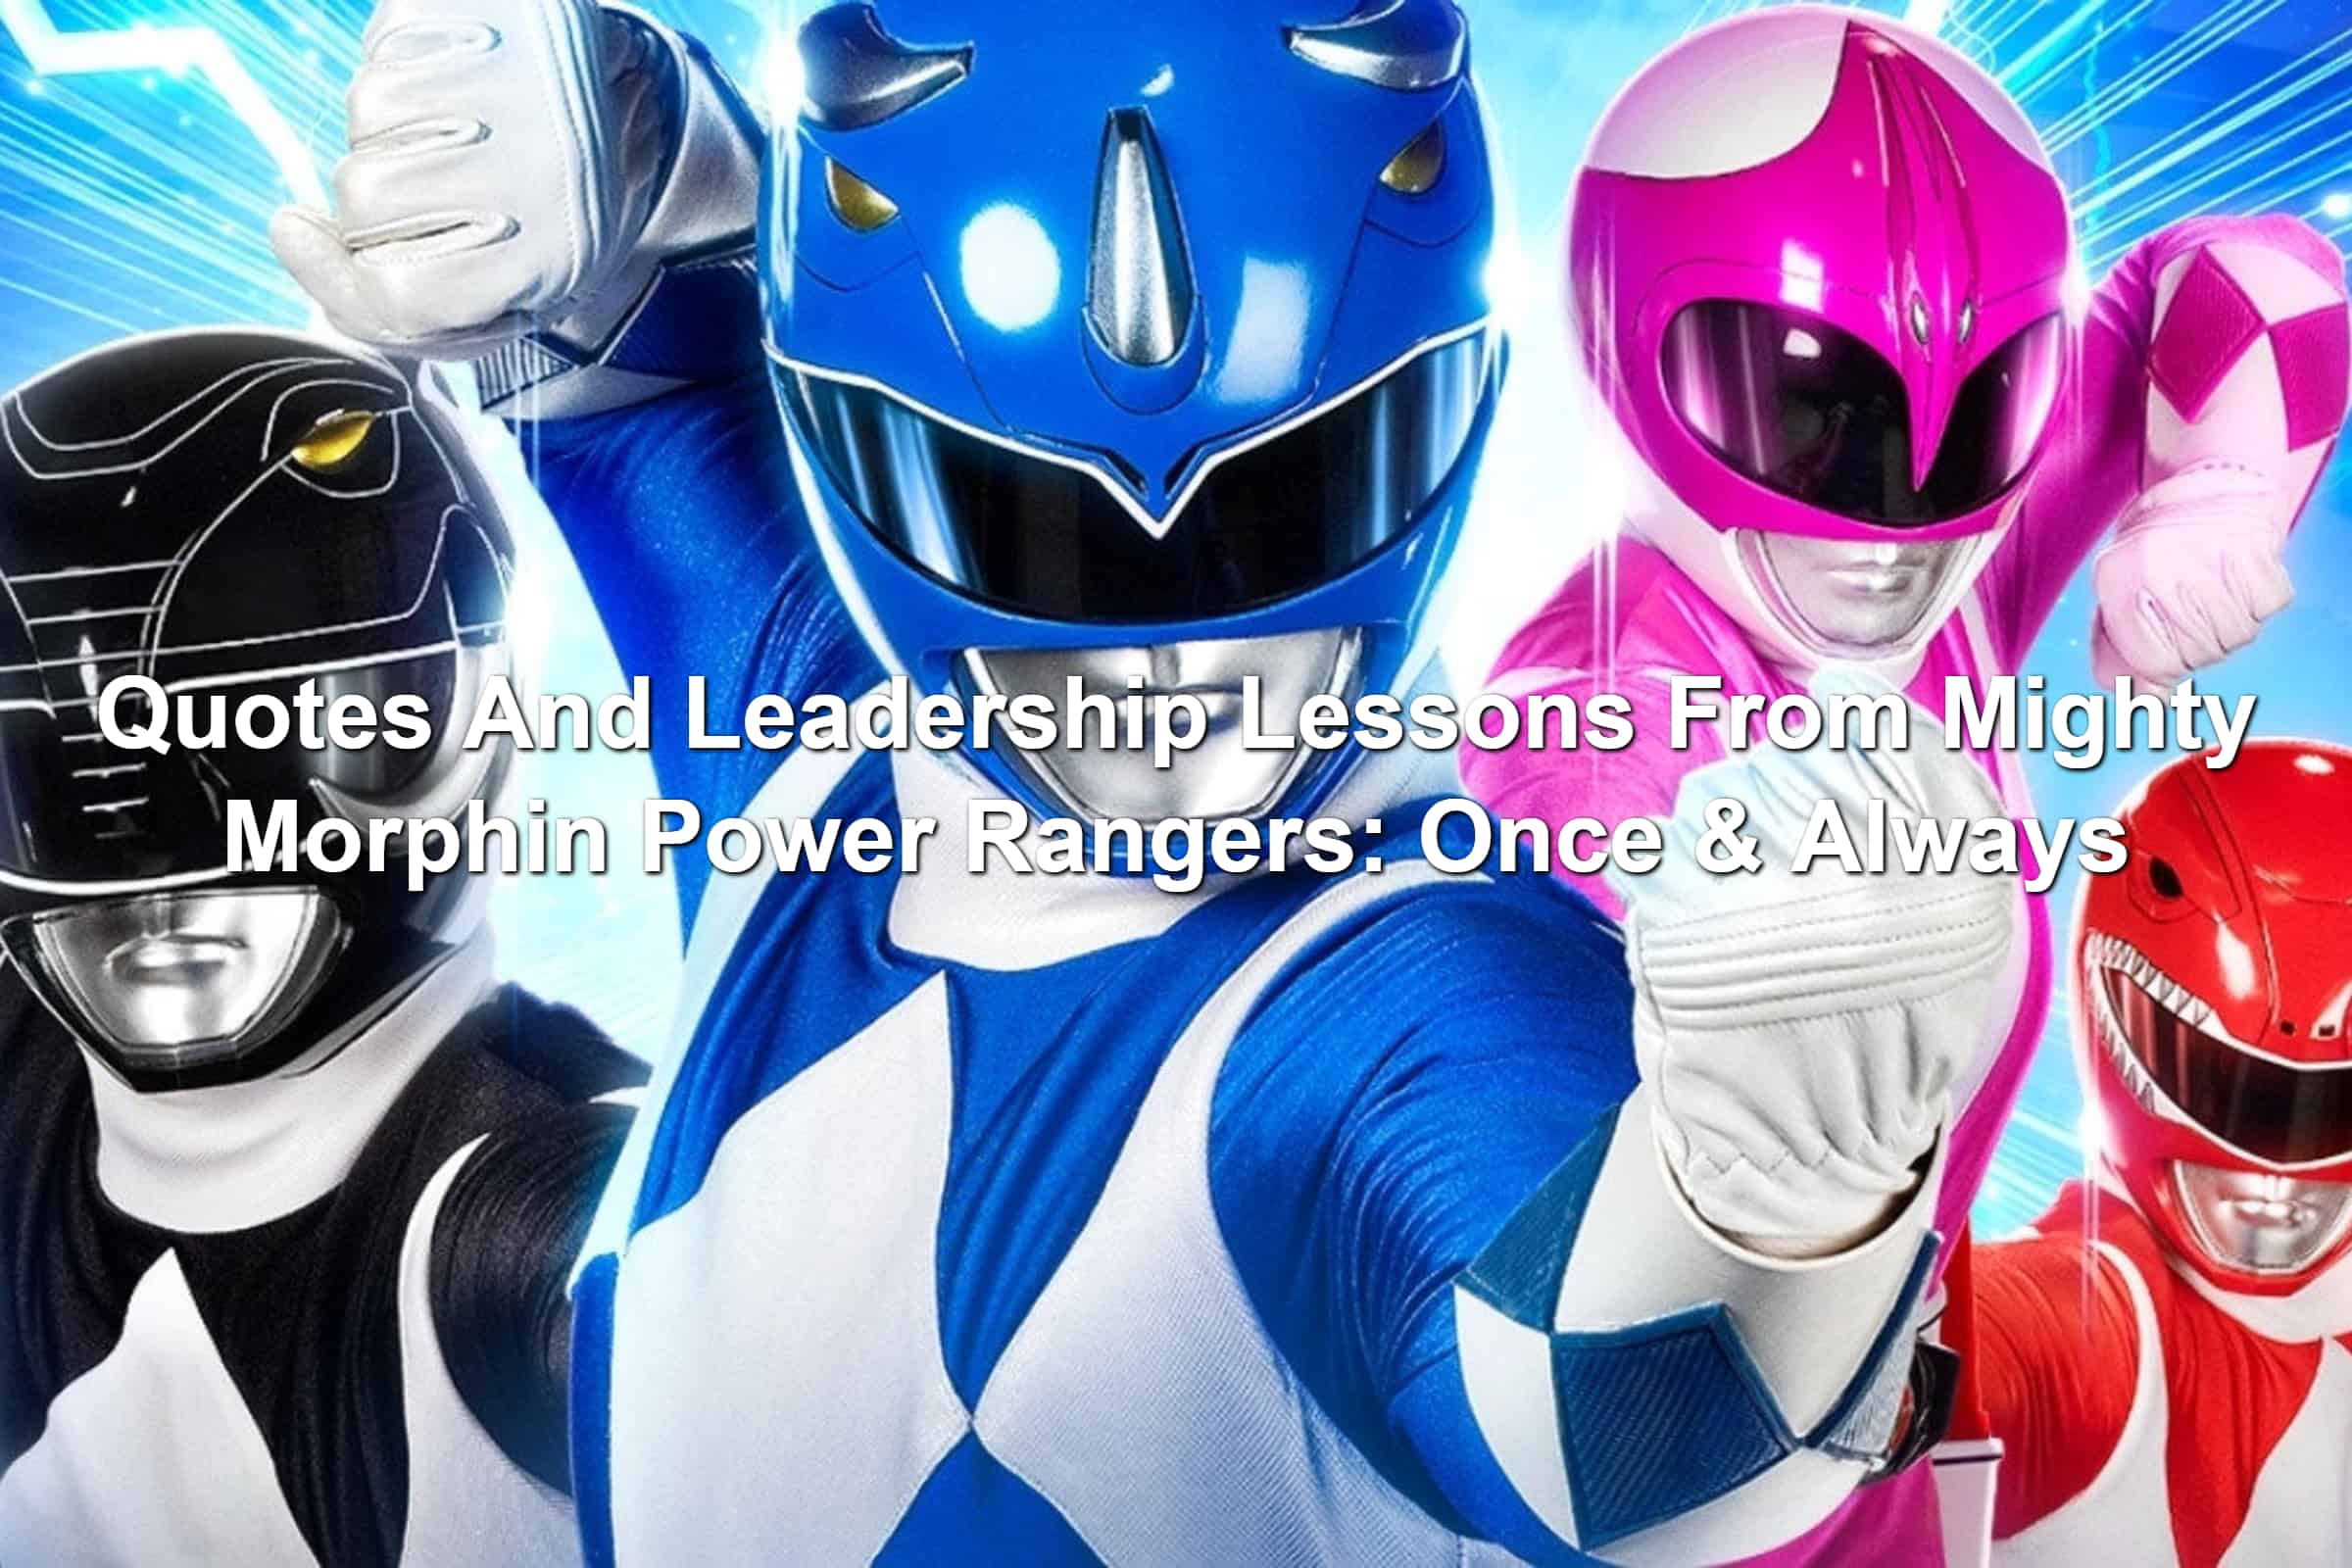 Black, Blue, Pink, and Red Rangers from the Mighty Morphin Power Rangers: Once & Always Netflix special